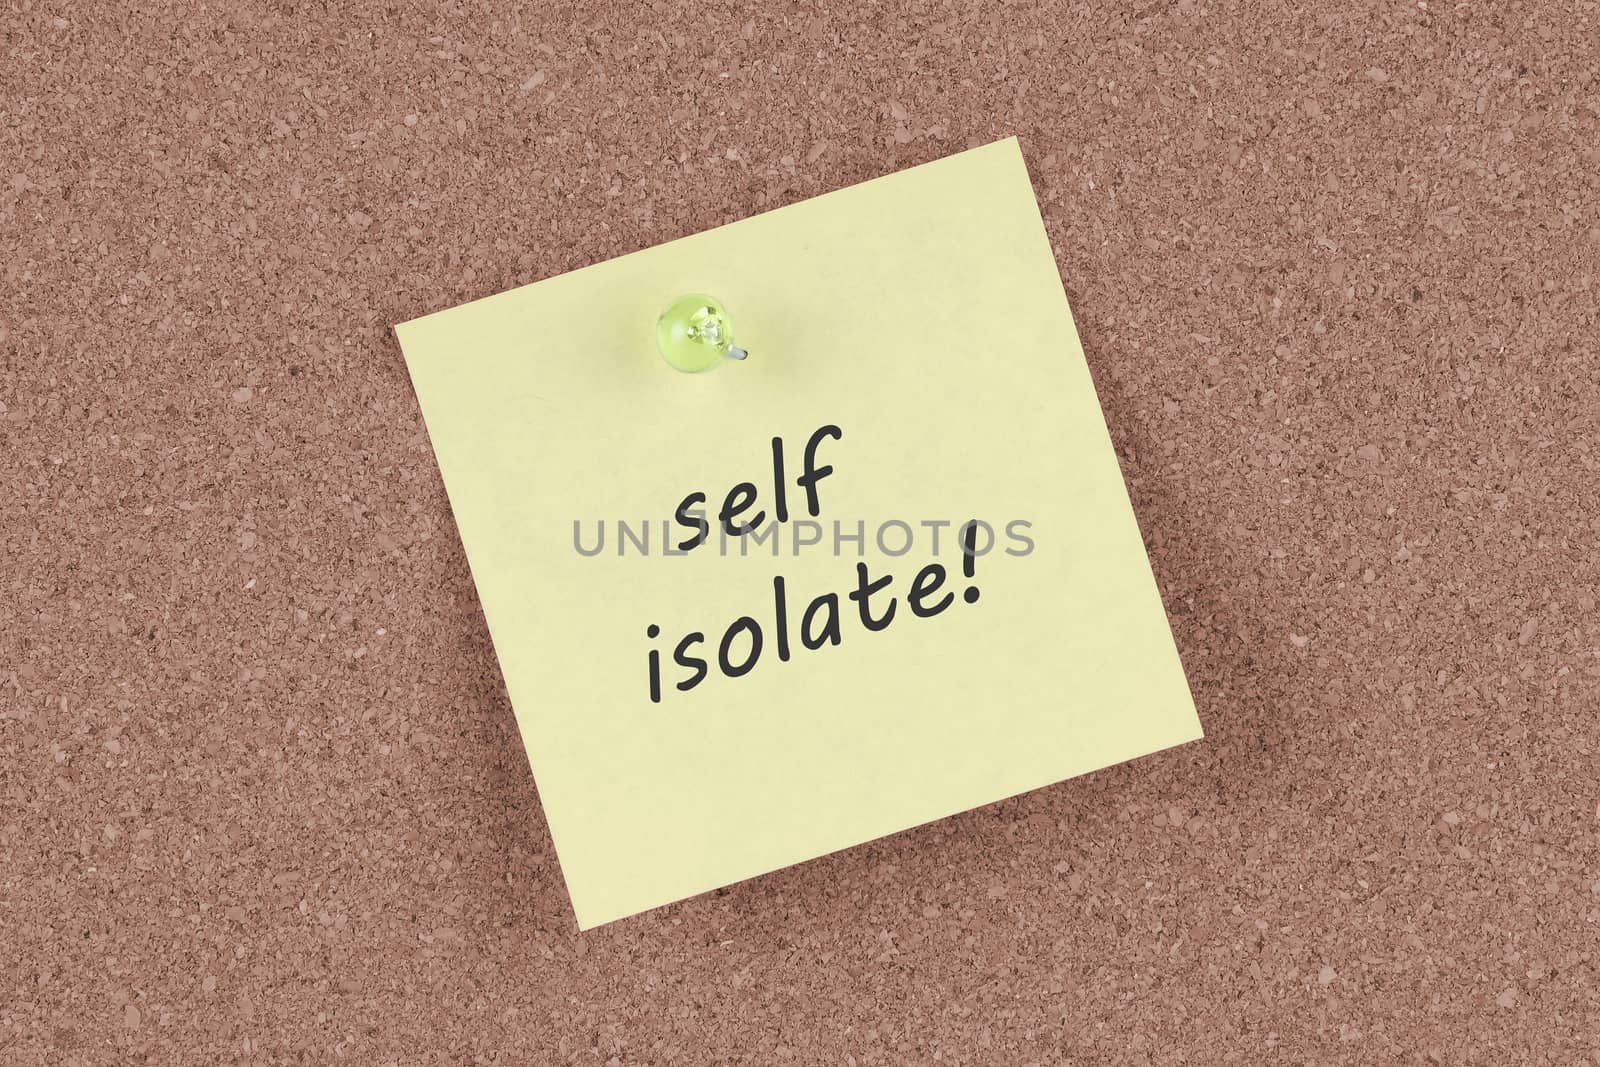 self isolate post note on a cork notice board by VivacityImages